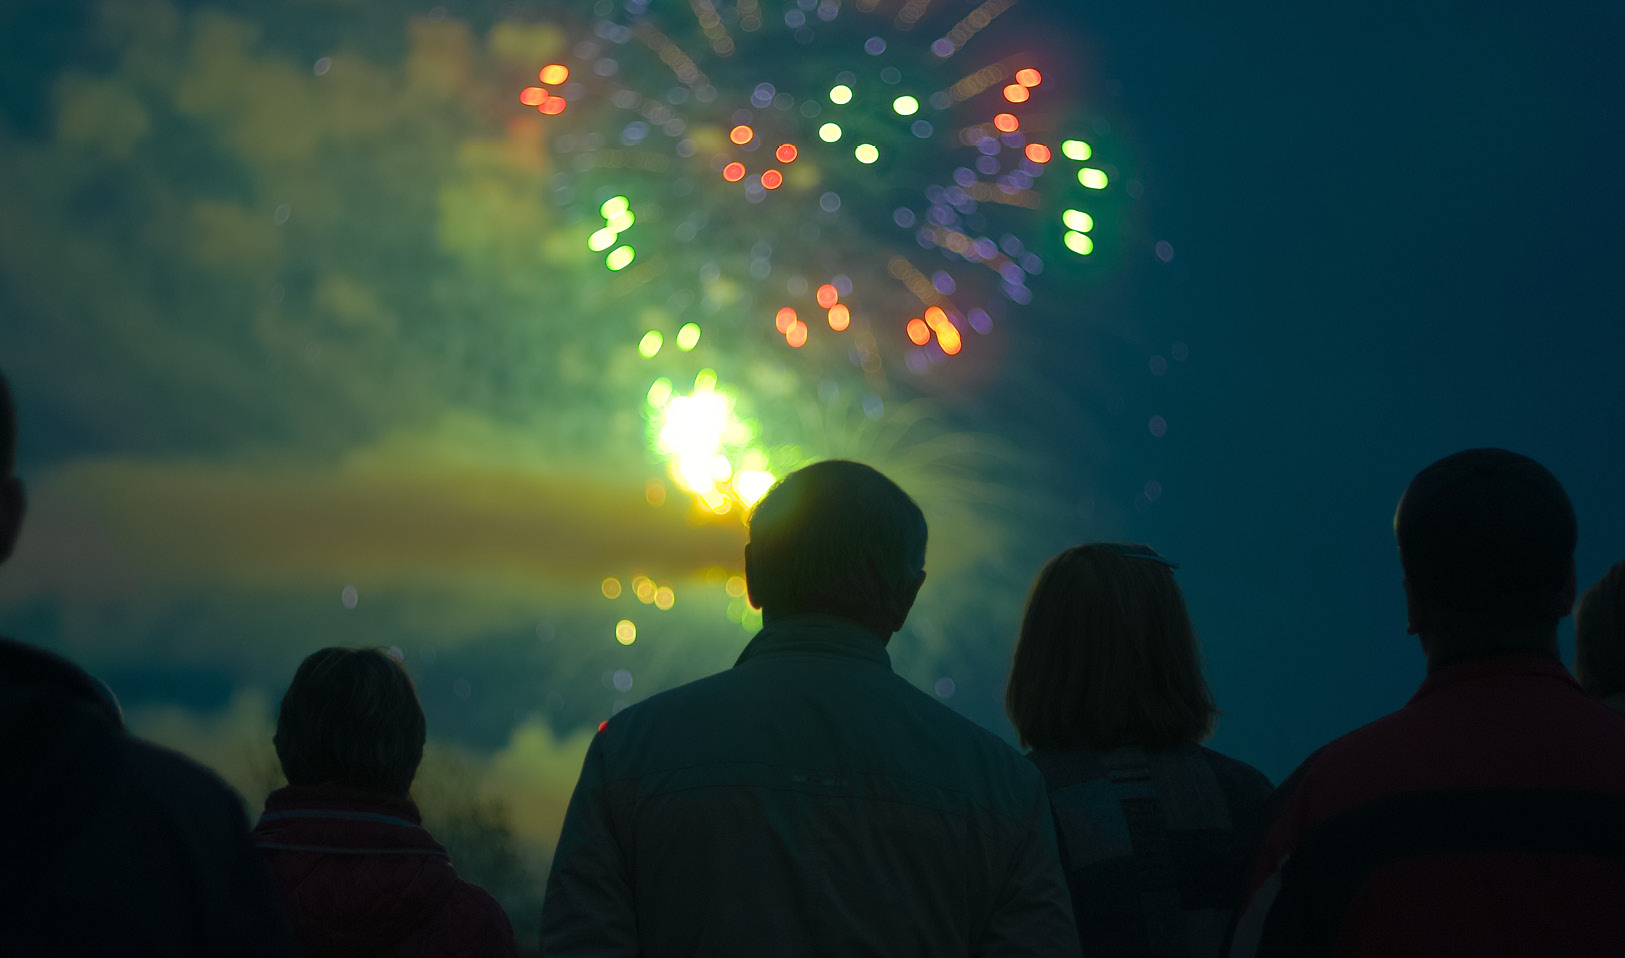 Fireworks night at the Wellcome Genome Campus open to the public October events, local community